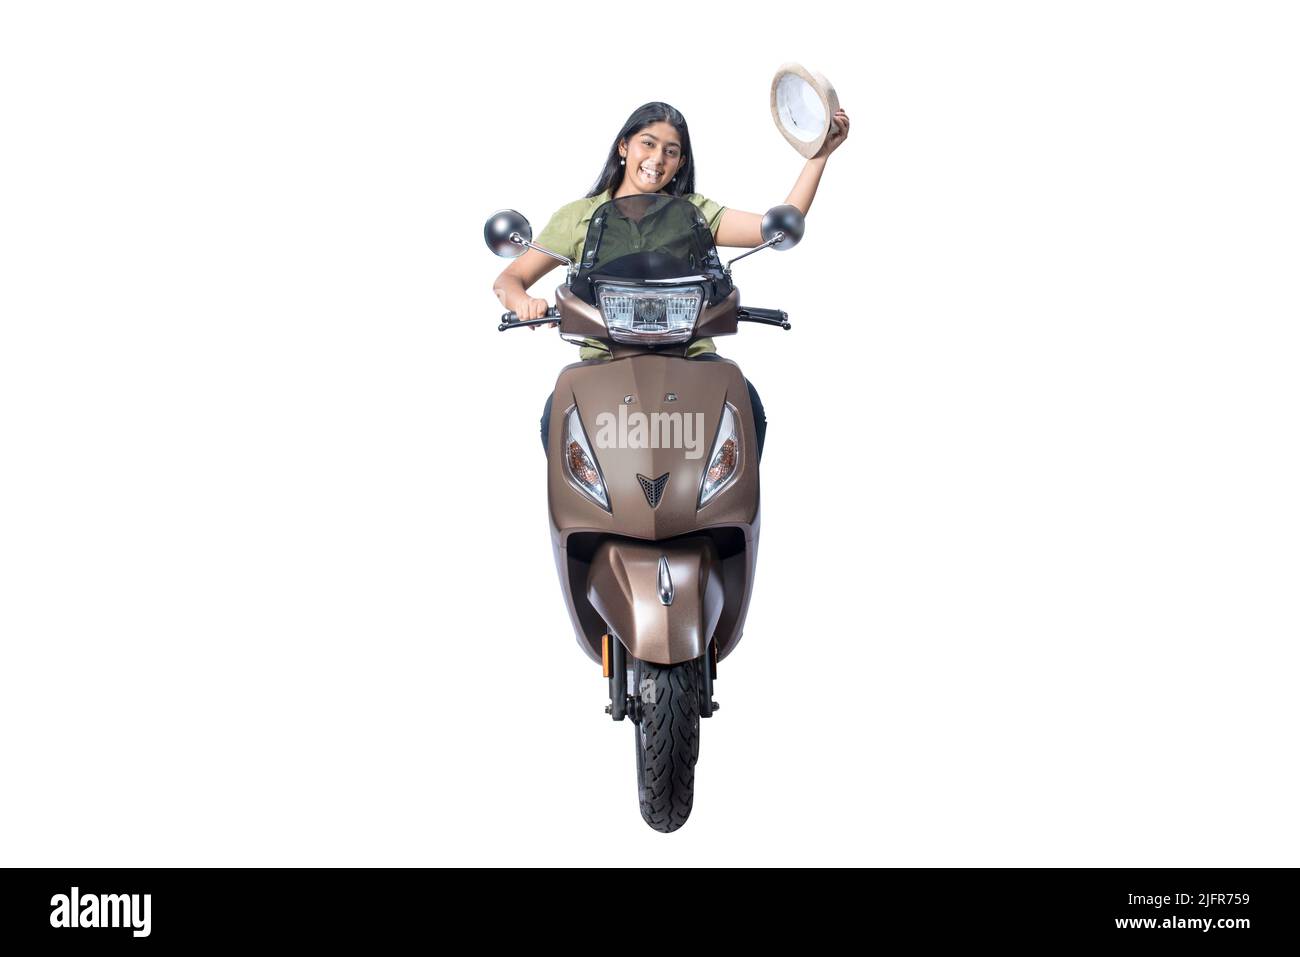 Asian woman sitting on a scooter and taking off hat isolated over white background Stock Photo